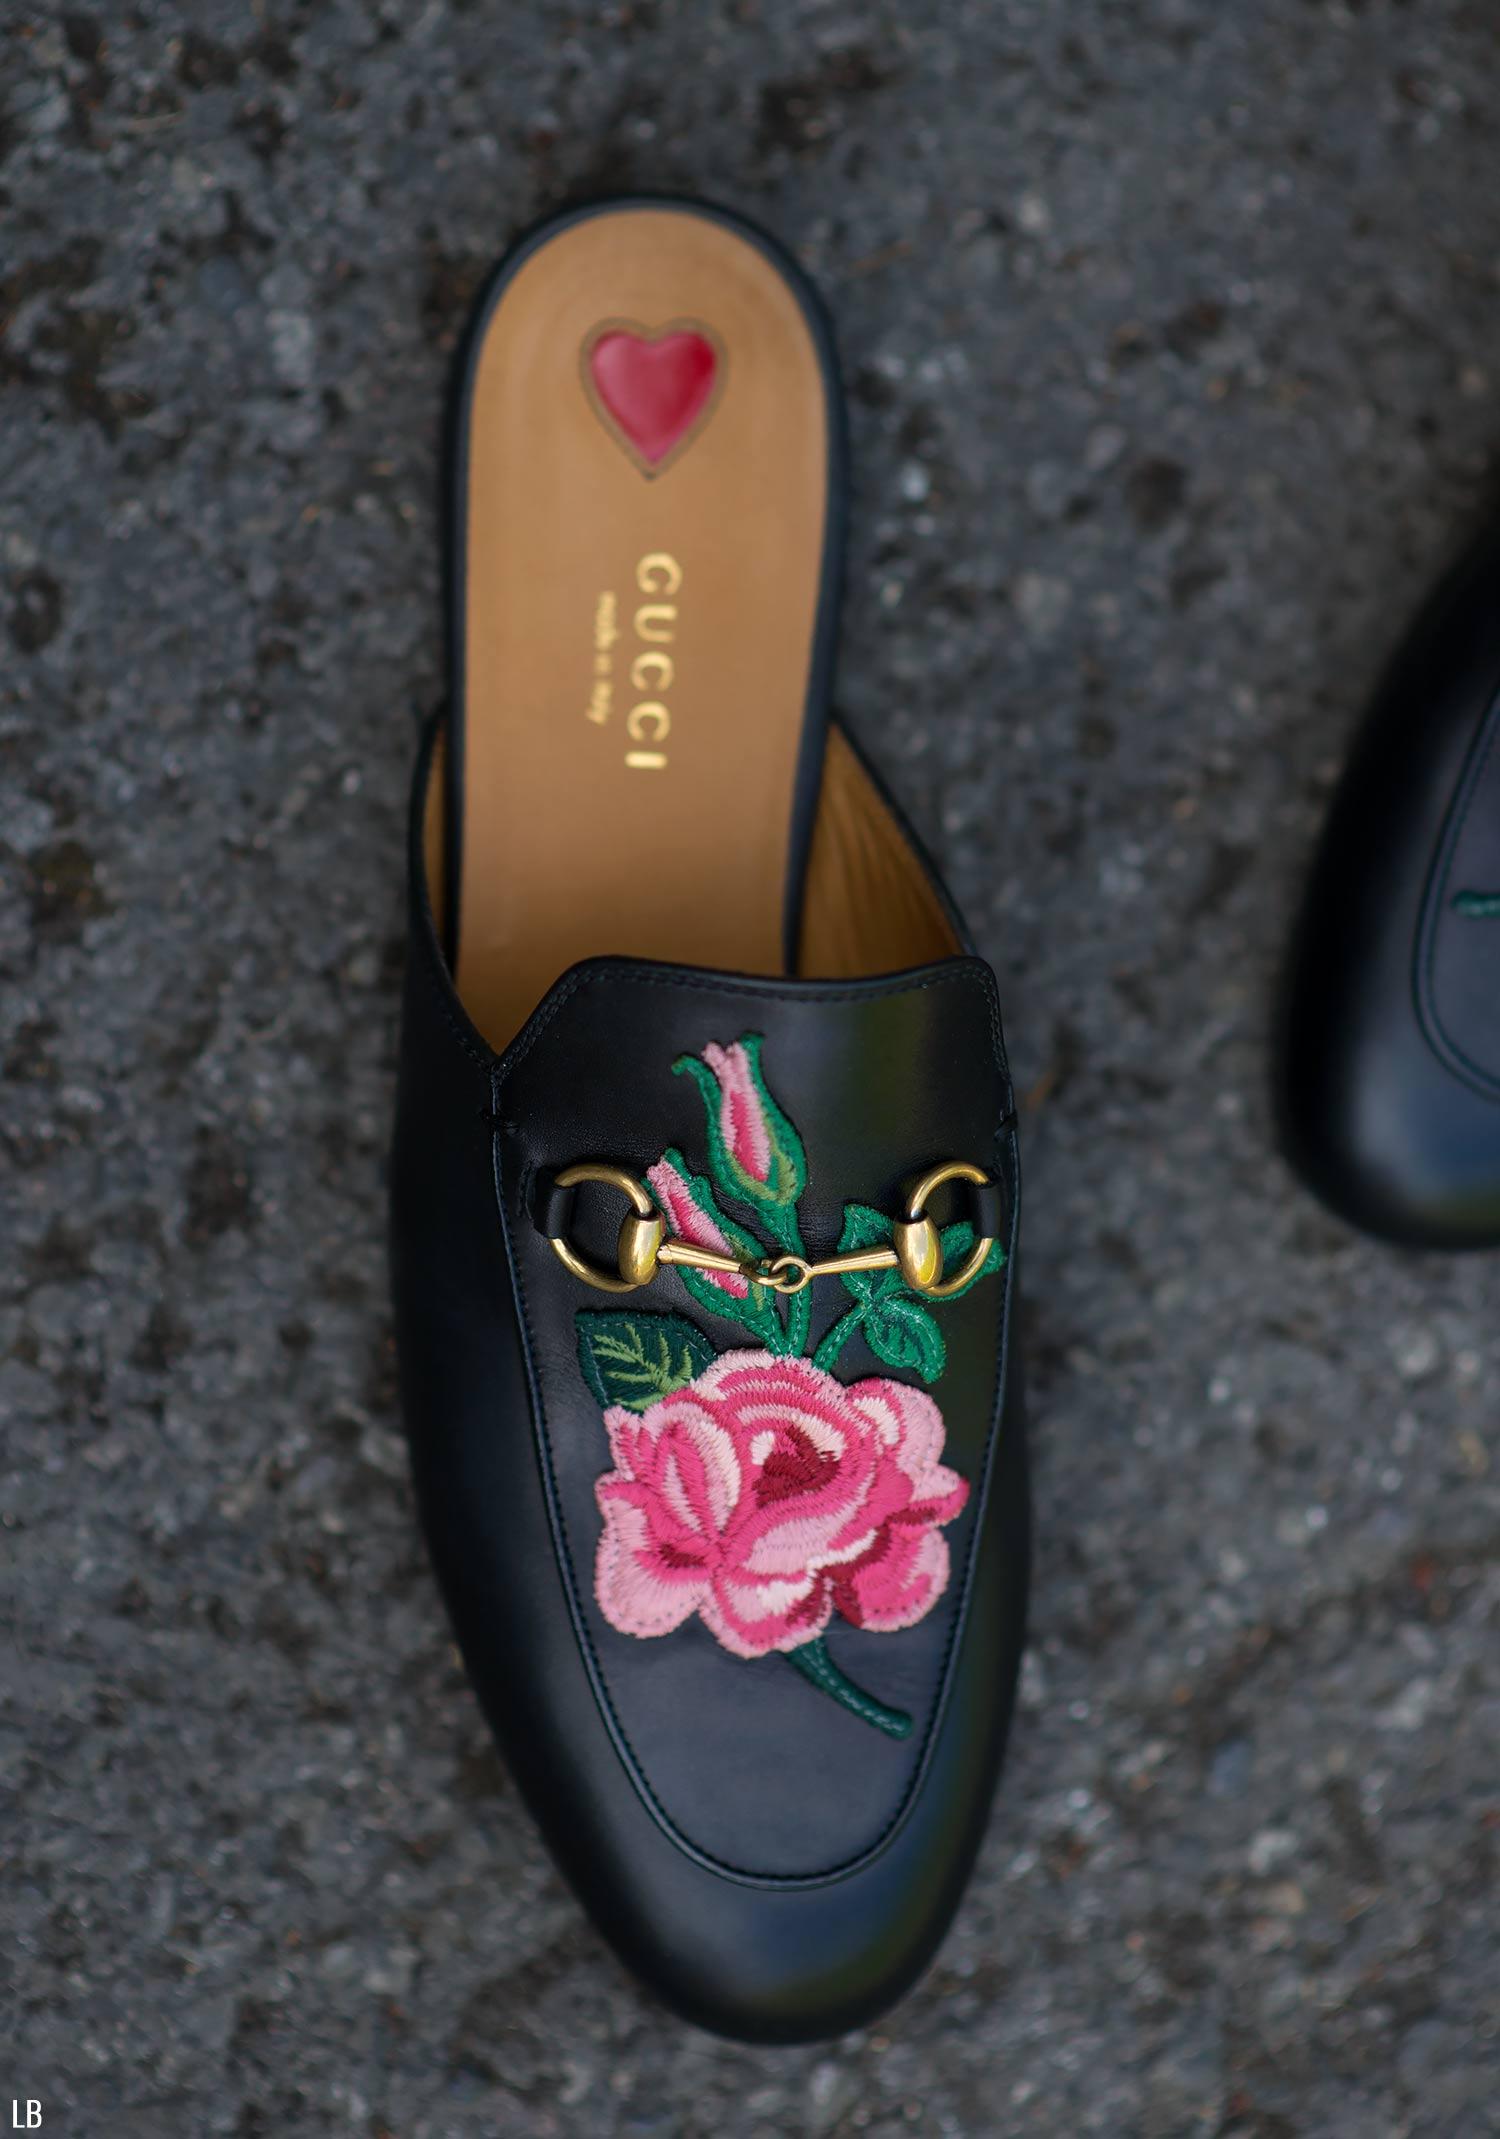 gucci flower loafers, OFF 77%,www 